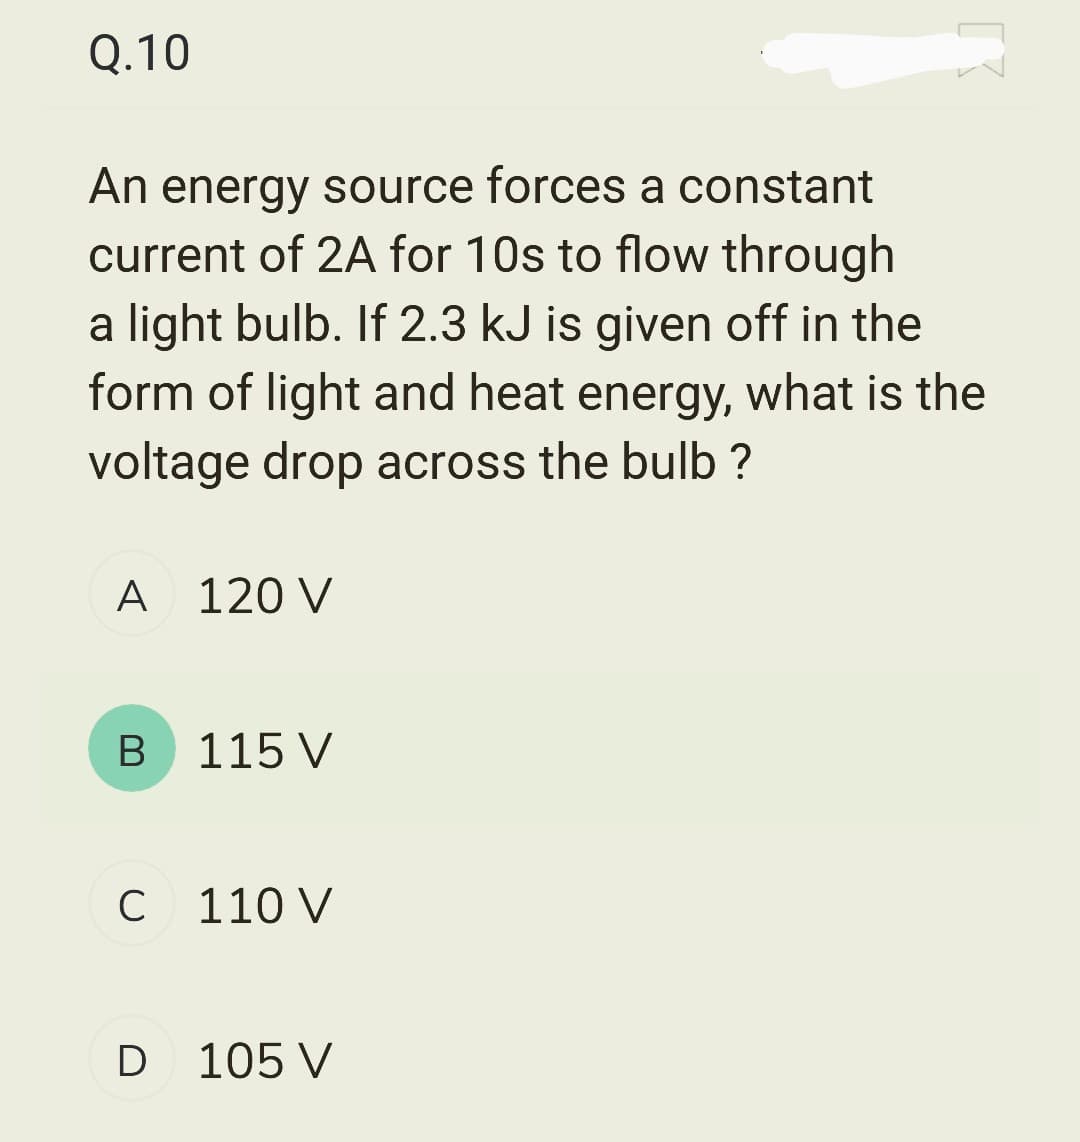 Q.10
An energy source forces a constant
current of 2A for 10s to flow through
a light bulb. If 2.3 kJ is given off in the
form of light and heat energy, what is the
voltage drop across the bulb ?
A 120 V
B
115 V
C 110 V
D 105 V